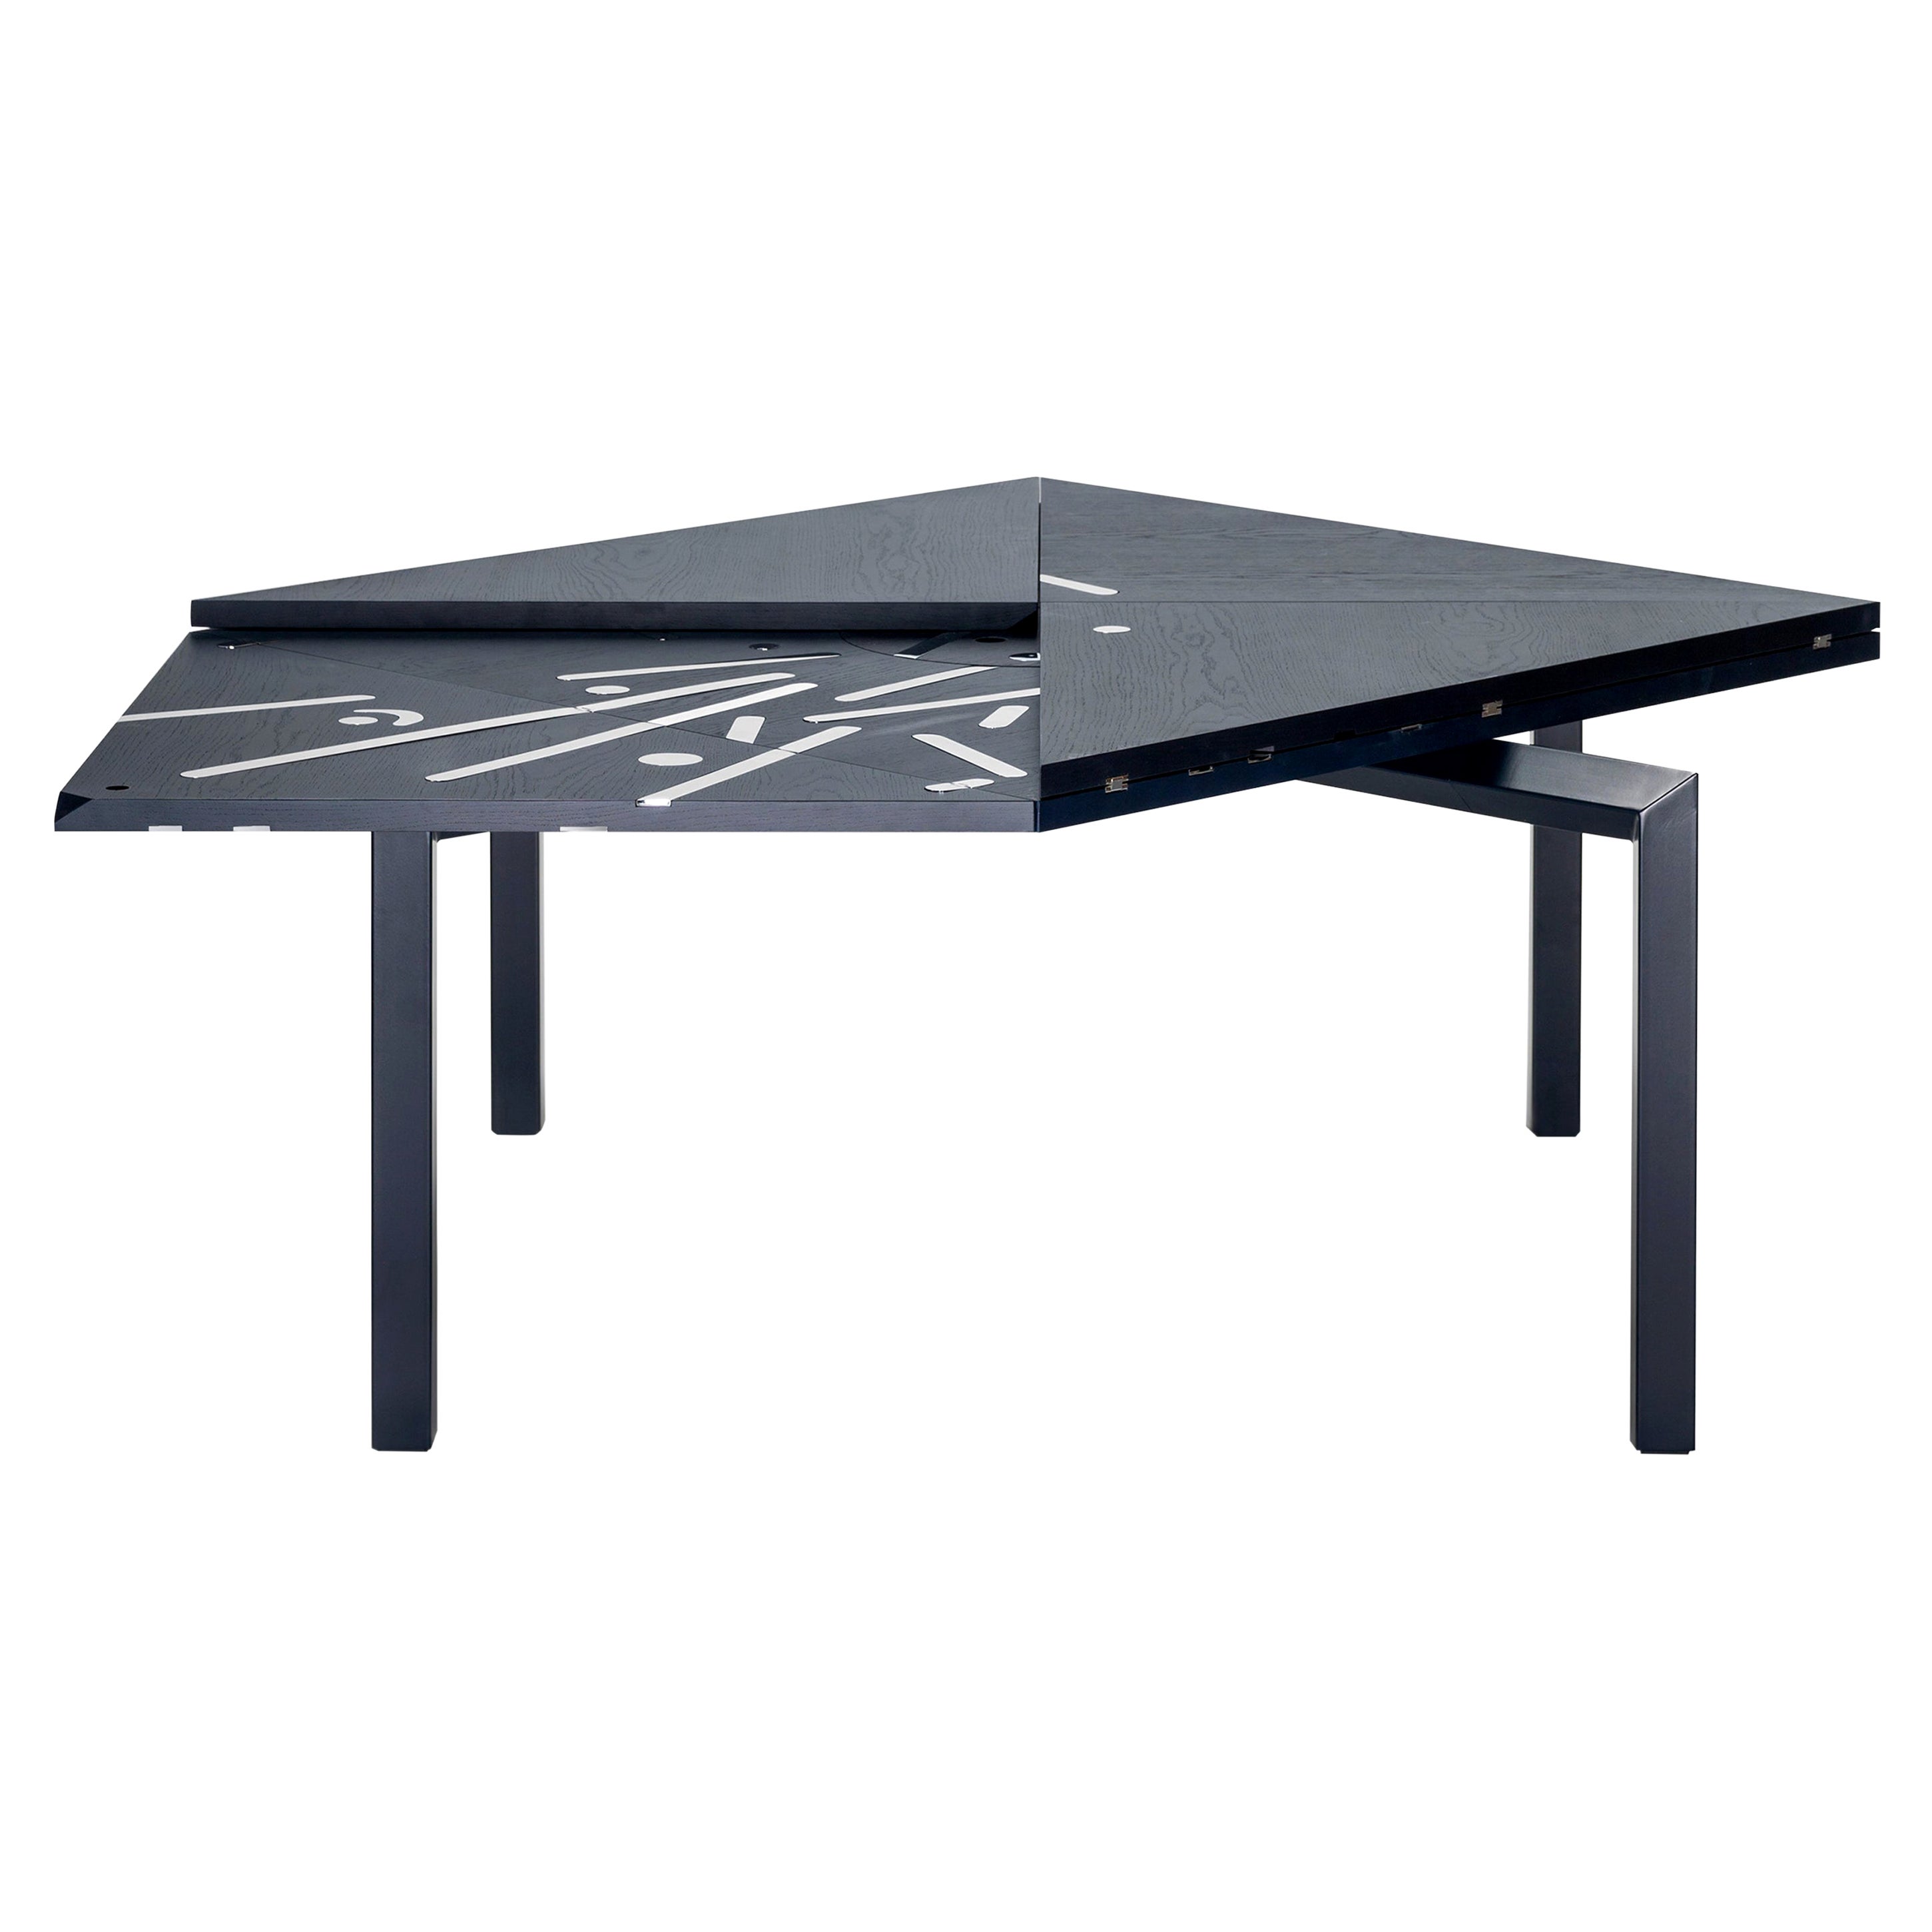 Limited Edition Alella Table by Lluis Clotet For Sale